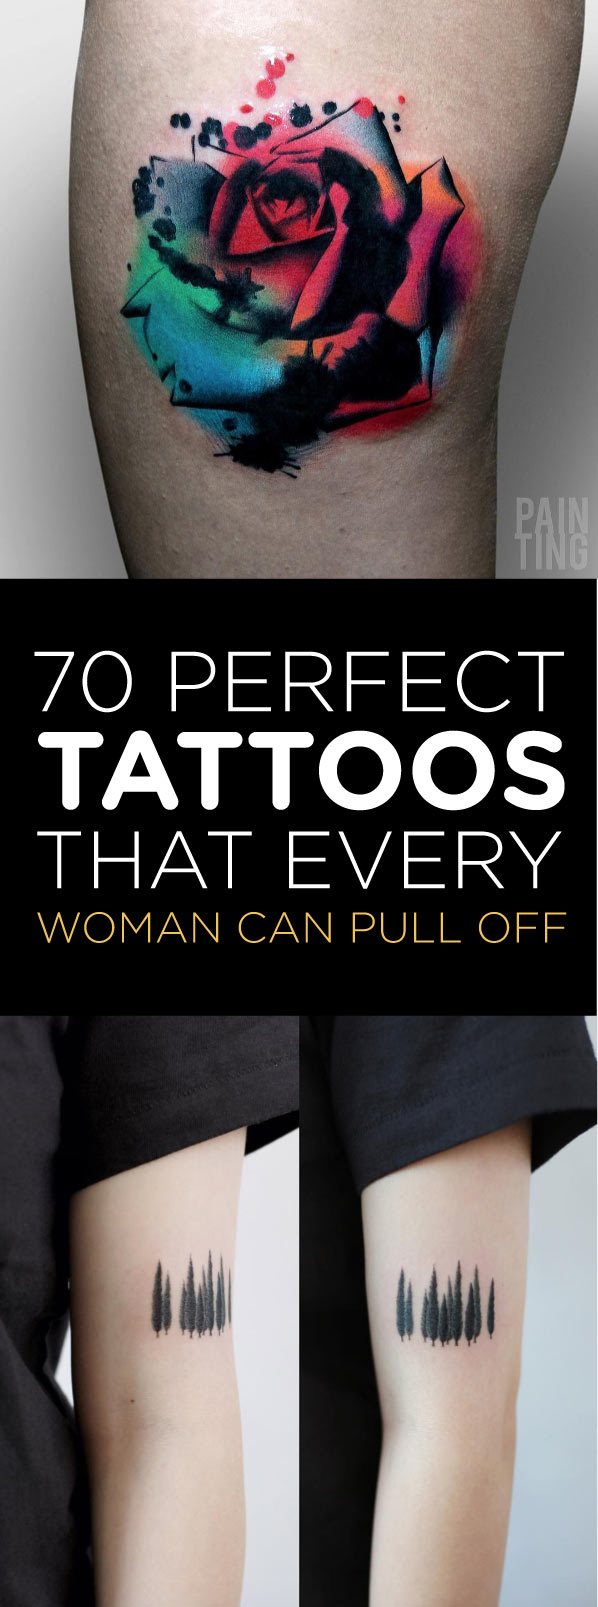 70 Perfect Tattoos That Every Woman Can Pull Off | TattooBlend